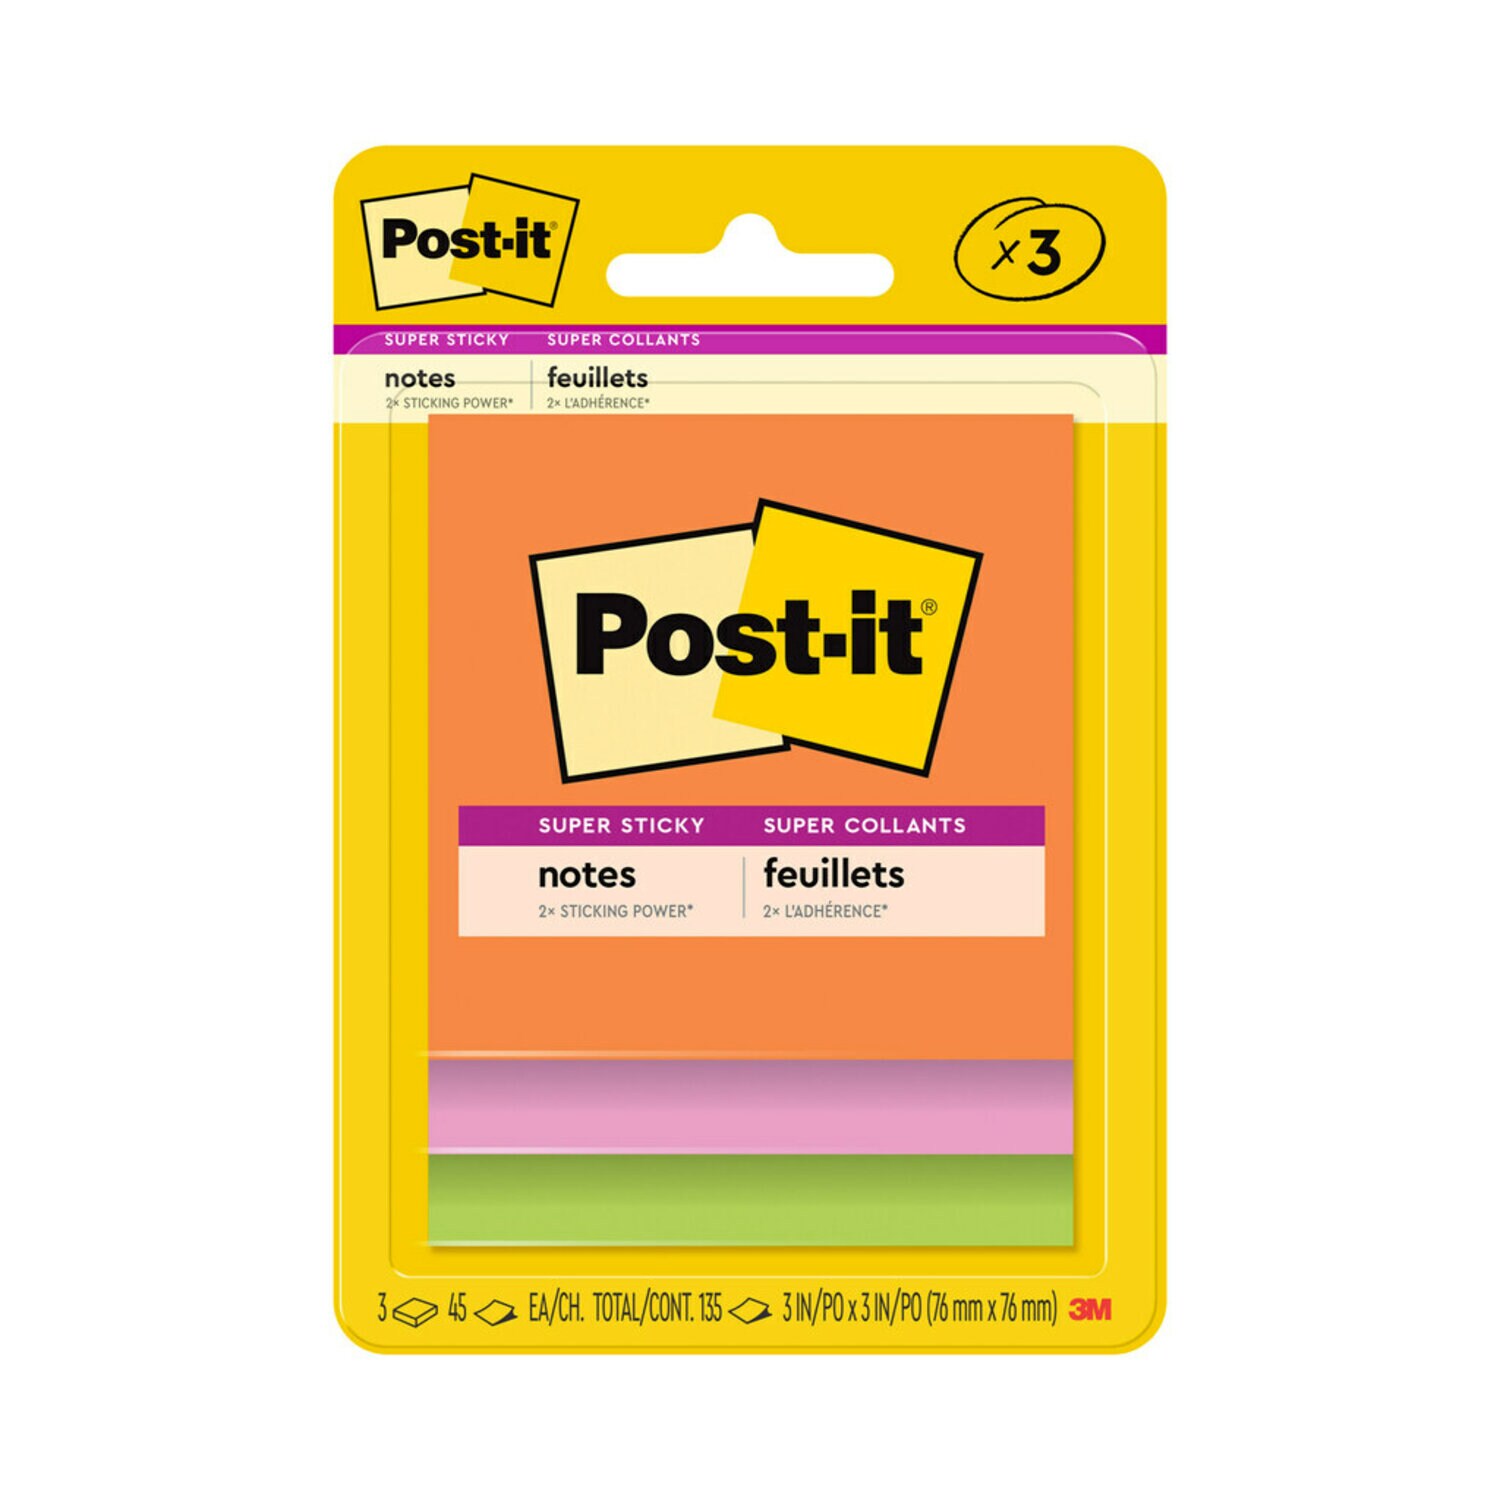 Post-it Sticky Cork Board, 22 x 36, Black and Gray, Includes Command  Fasteners, 1 Each (Quantity) 